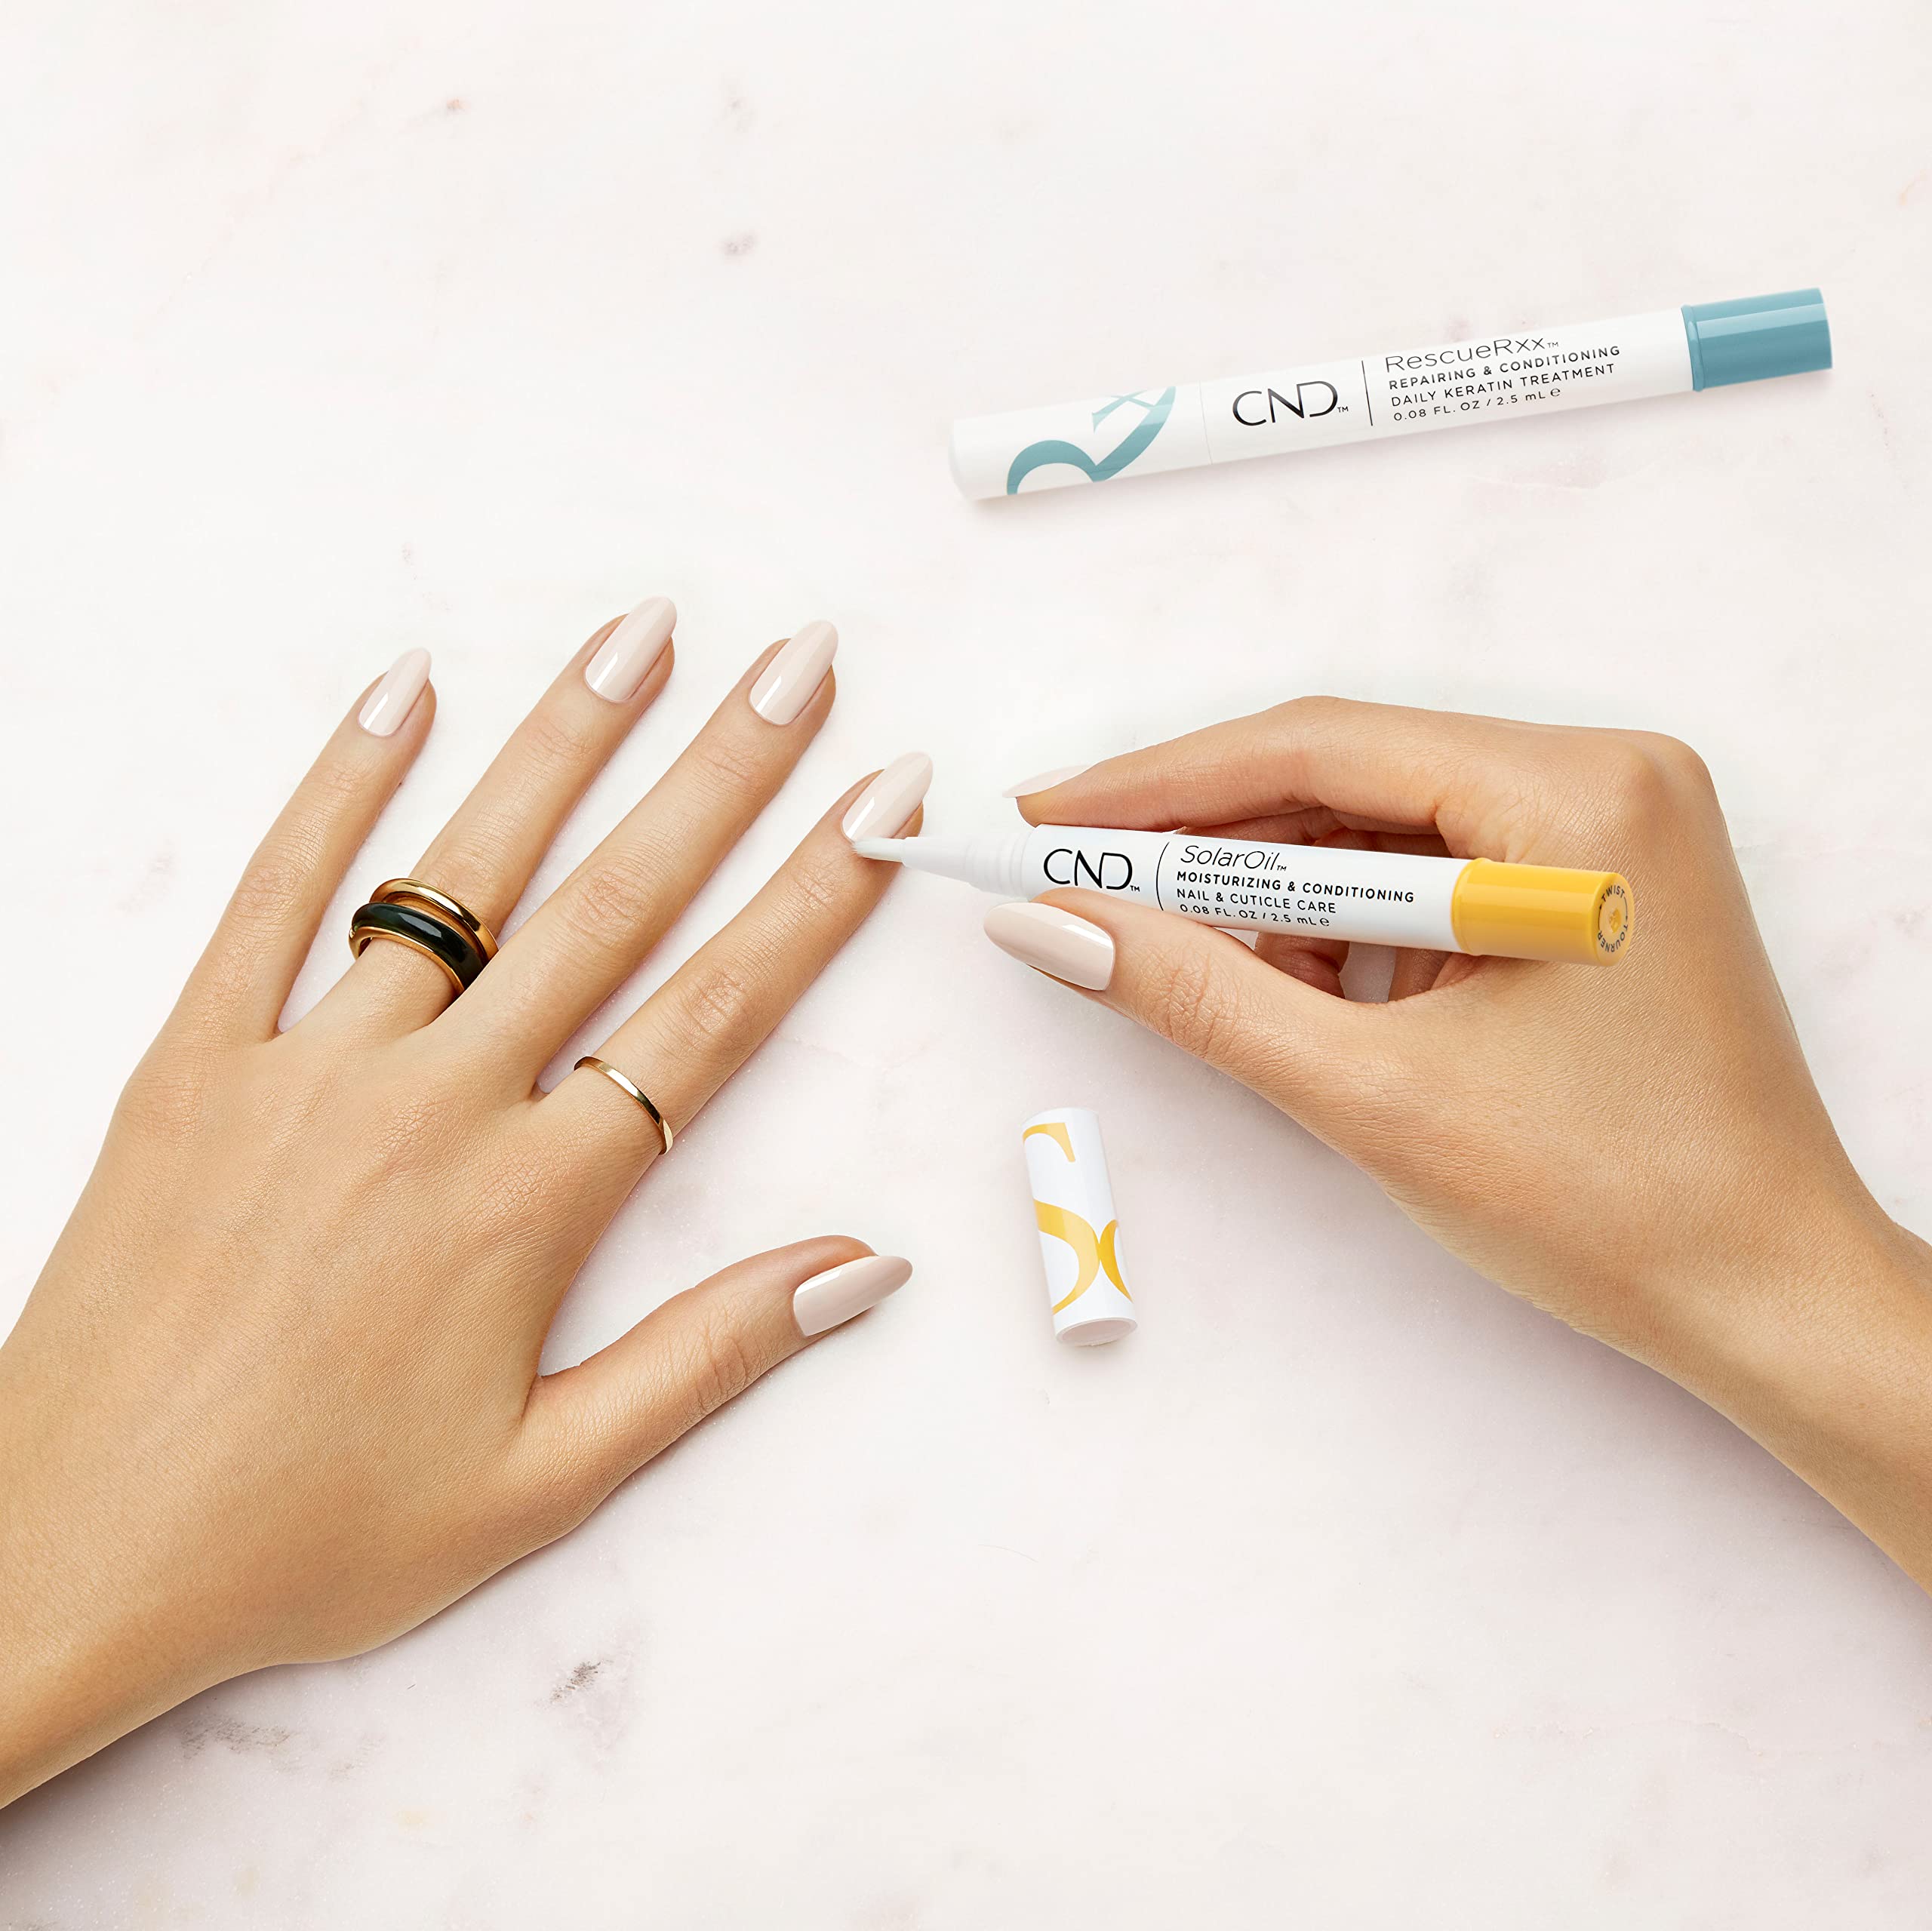 CND Solar Oil & RescueRxx Nail and Cuticle Care, Cuticle Oil Pen, Keratin Treatment Pen, On-the-Go, Travel-Sized Beauty